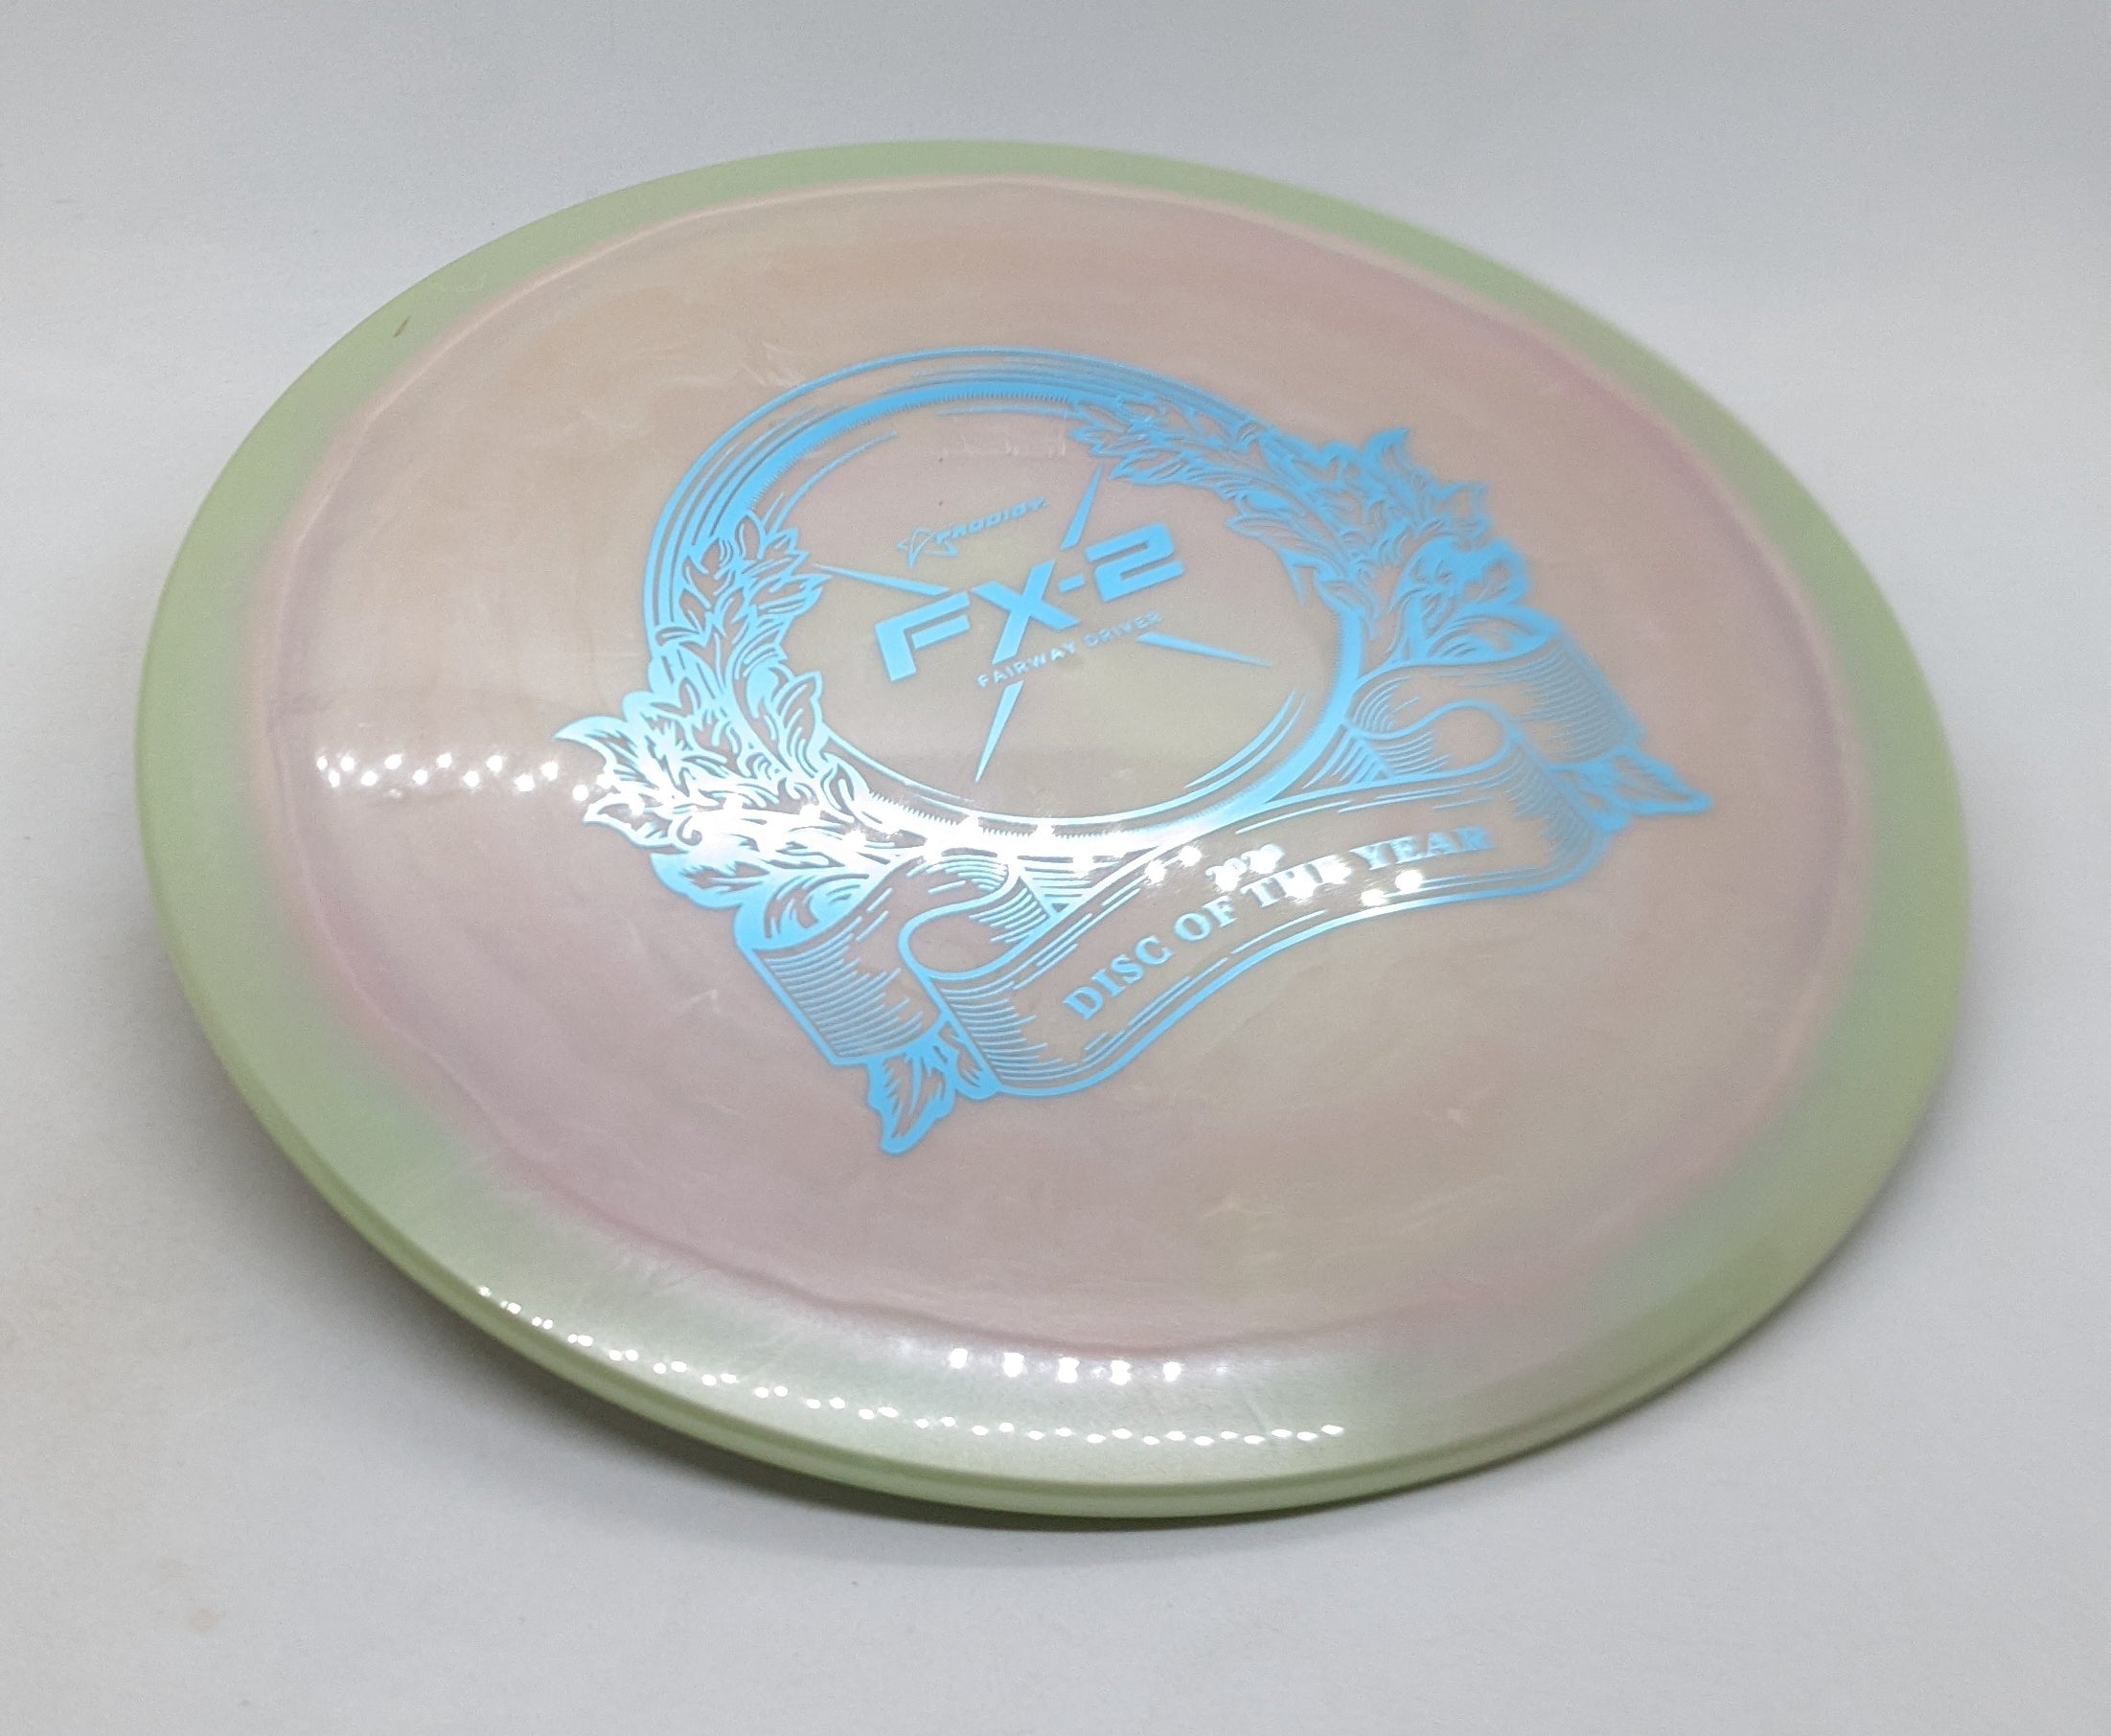 Prodigy FX-2 400G 2020 Disc of the Year Stamp-8